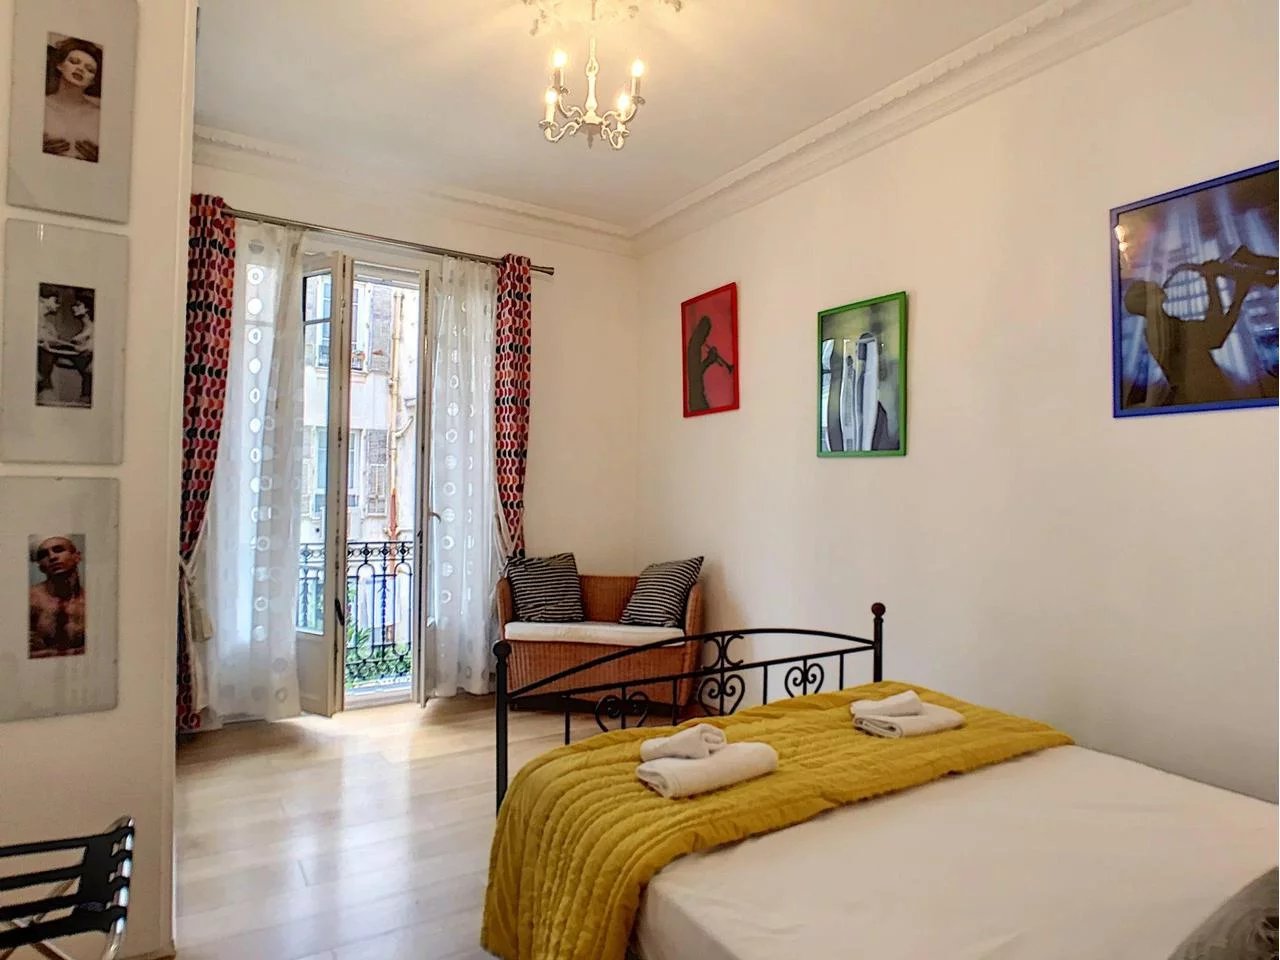 Appartement  3 Rooms 70.24m2  for sale   495 000 €